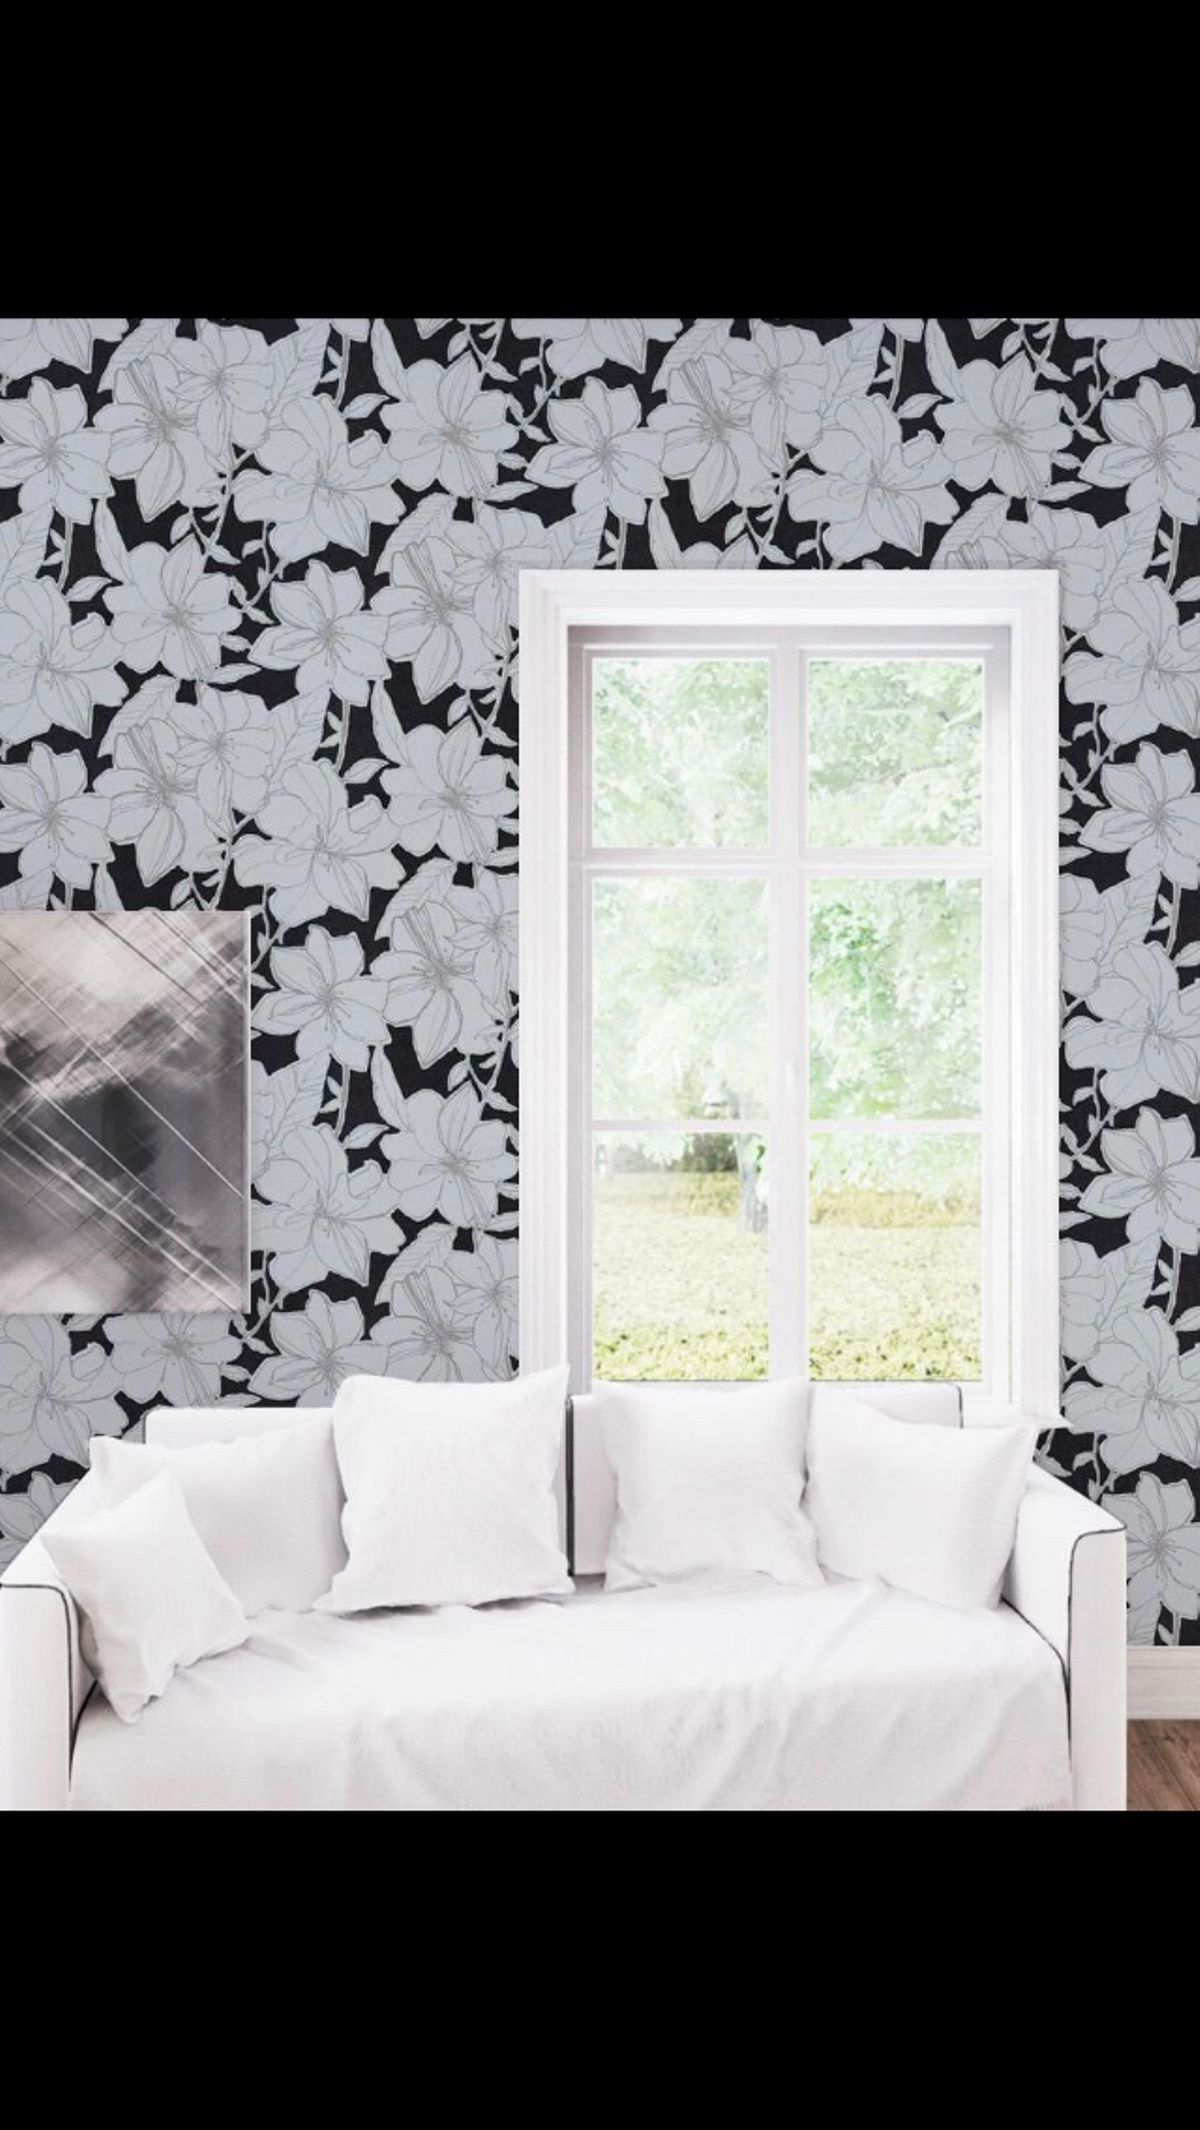 Harlequin Wallpaper One Roll Only
retails Around £40 - Cole And Son Mineral - HD Wallpaper 